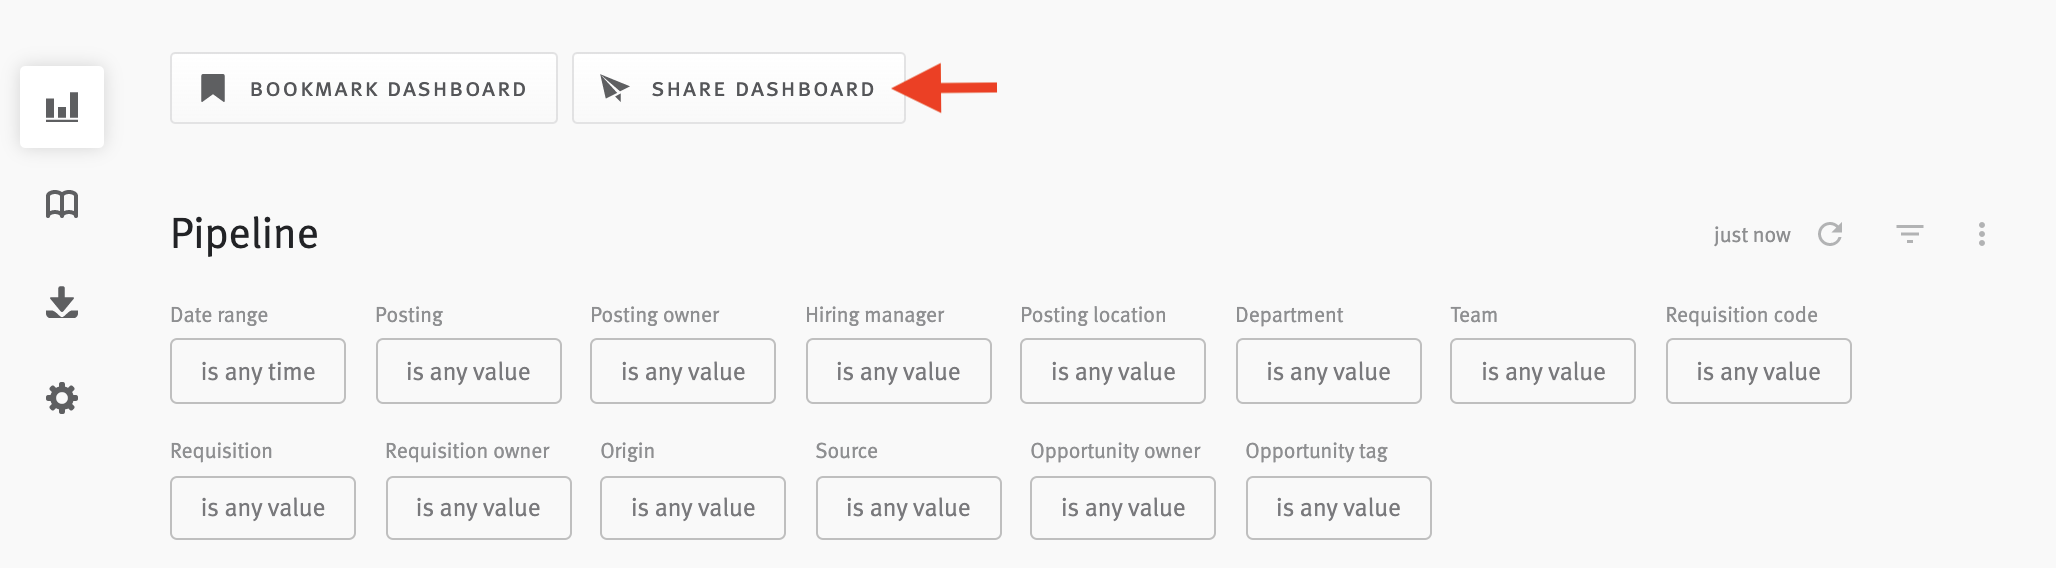 Arrow pointing to Share Dashboard button above Pipeline dashboard.